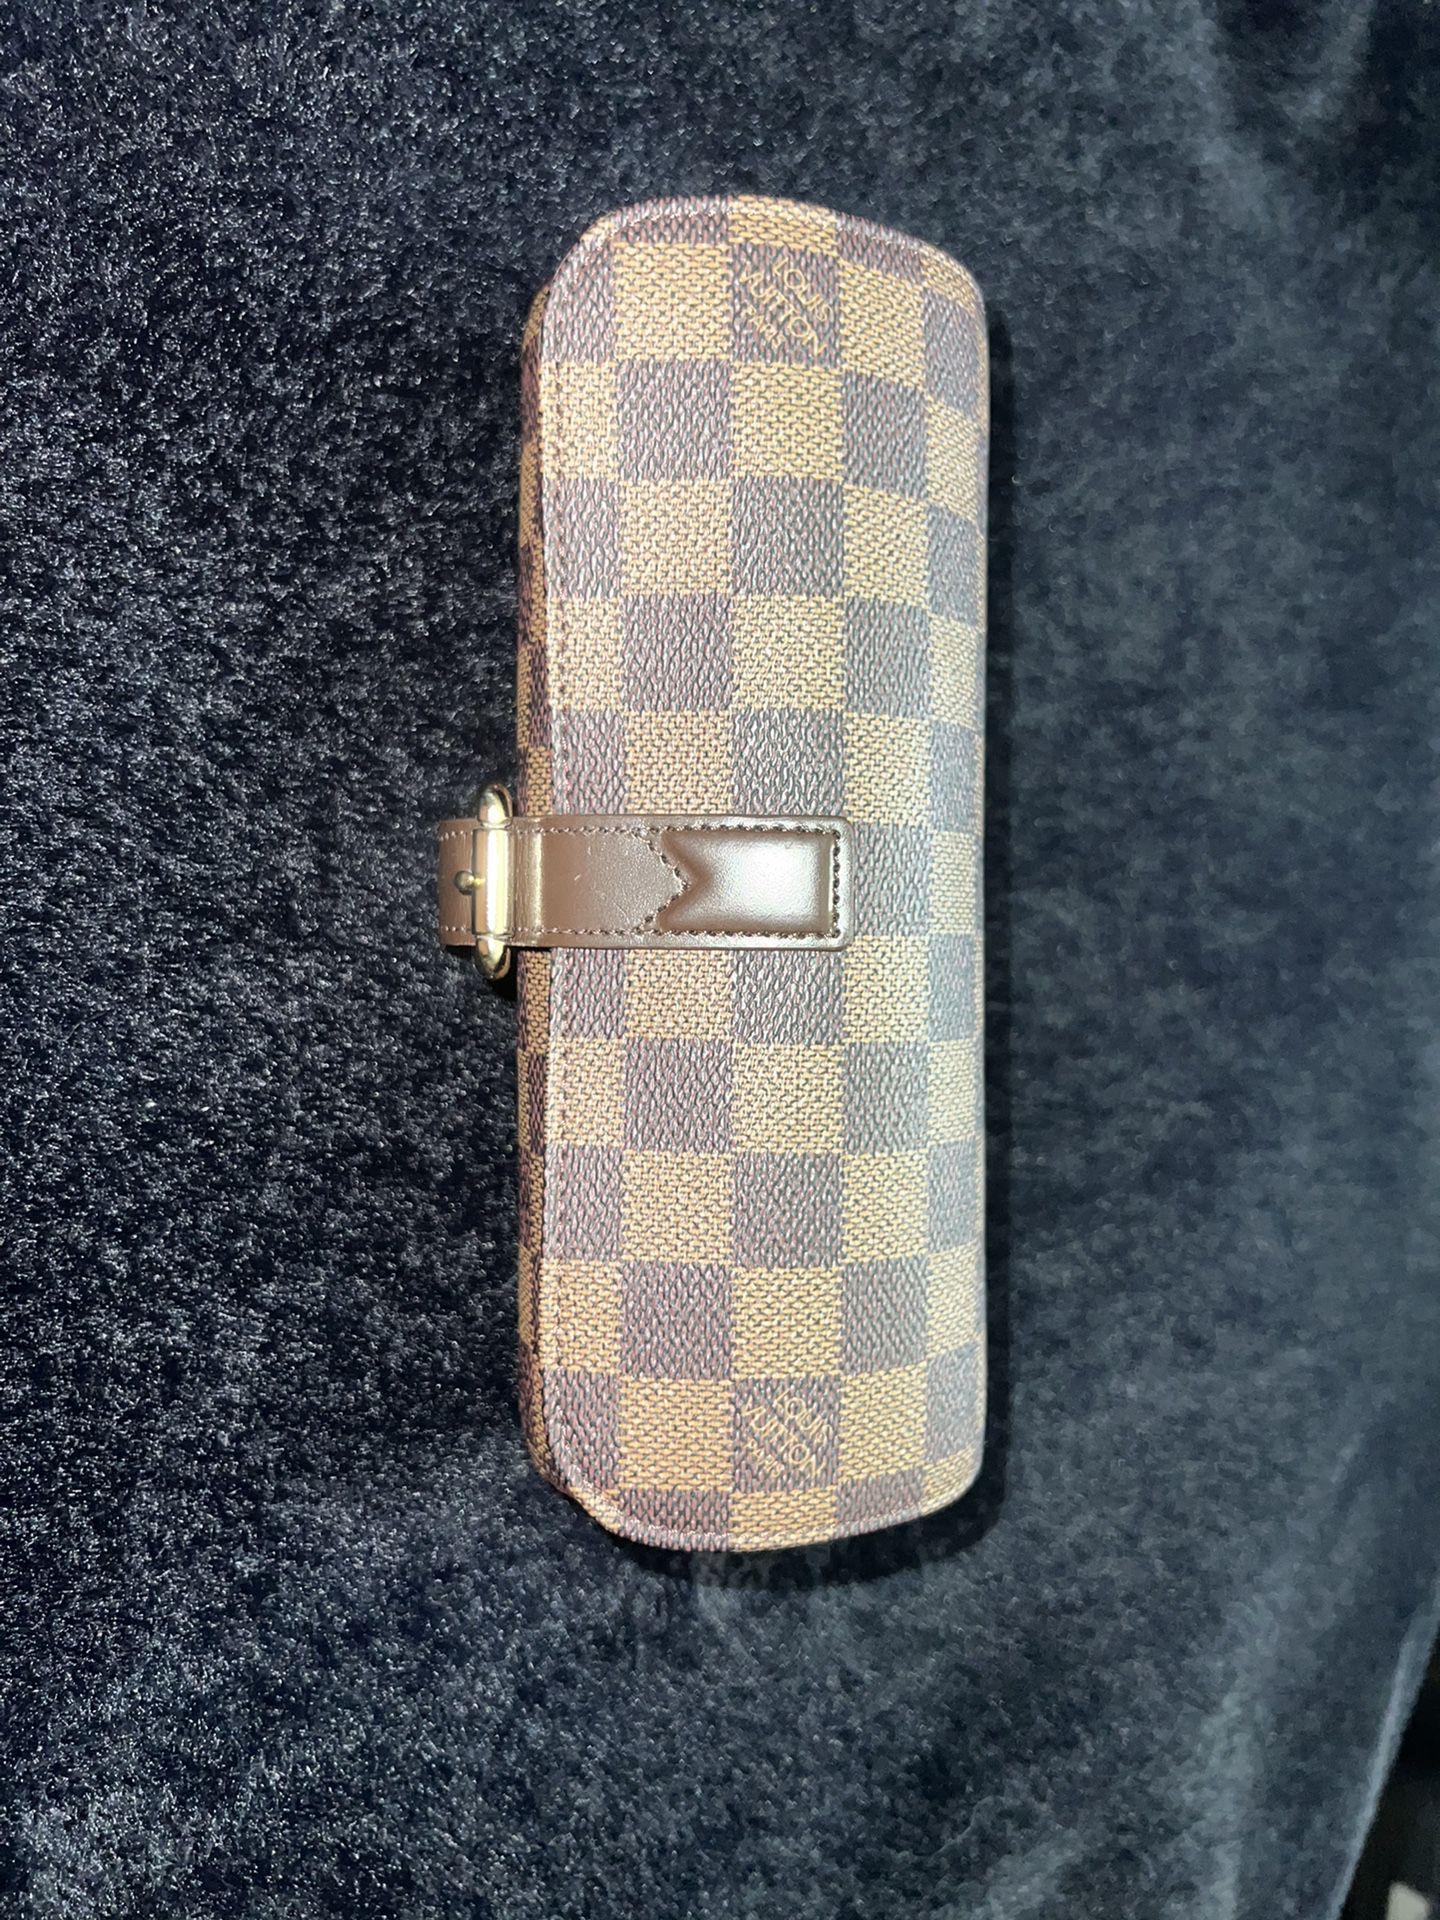 SOLD***Louis Vuitton Watch Roll***SOLD